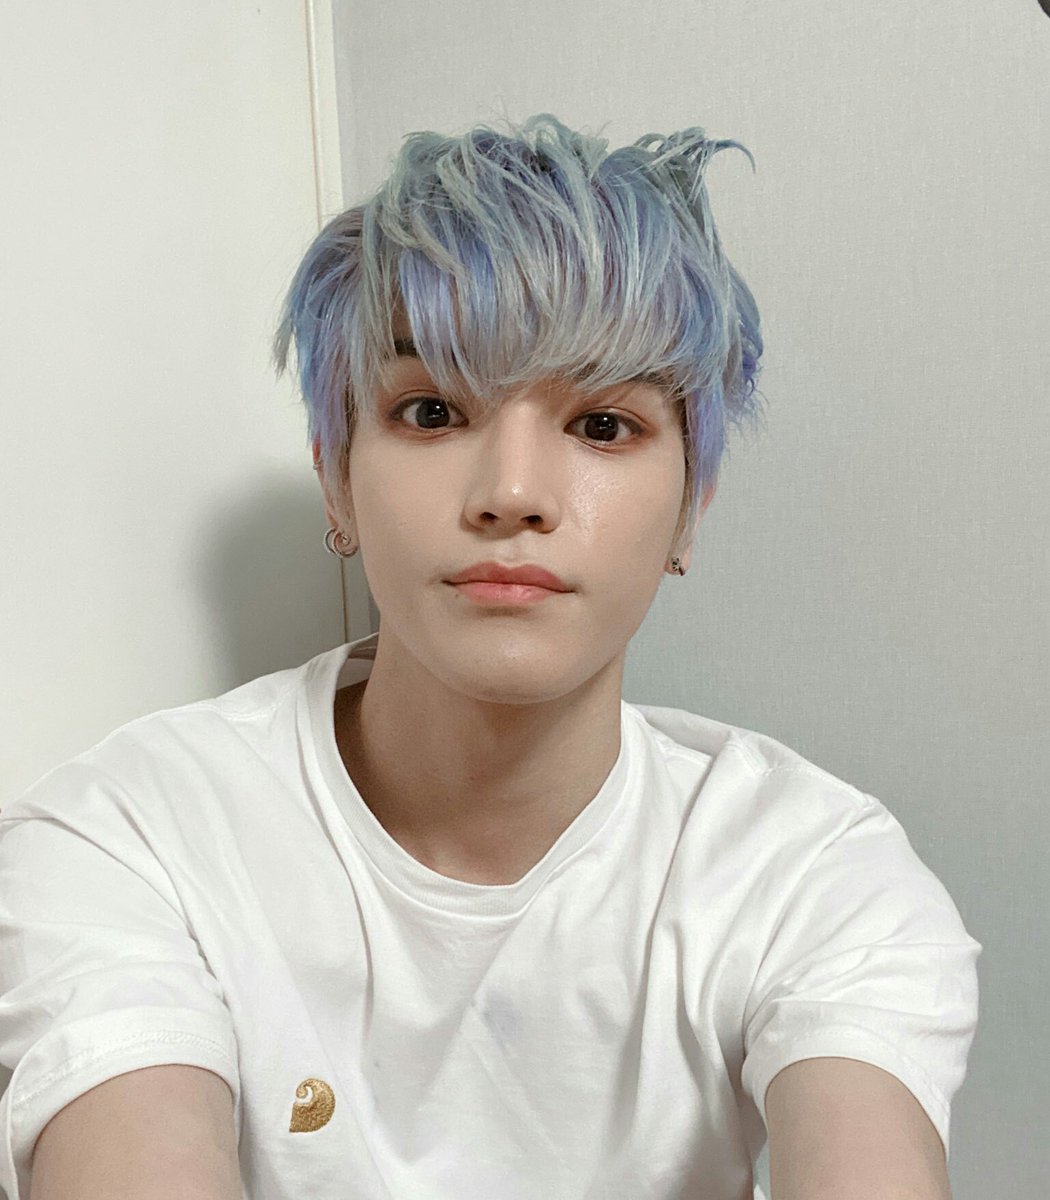 taeyong as jinsoul:1. neurons killed by hair discoloration2. visual king&queen3. they do everything good4. strong on stage but they are really shy 